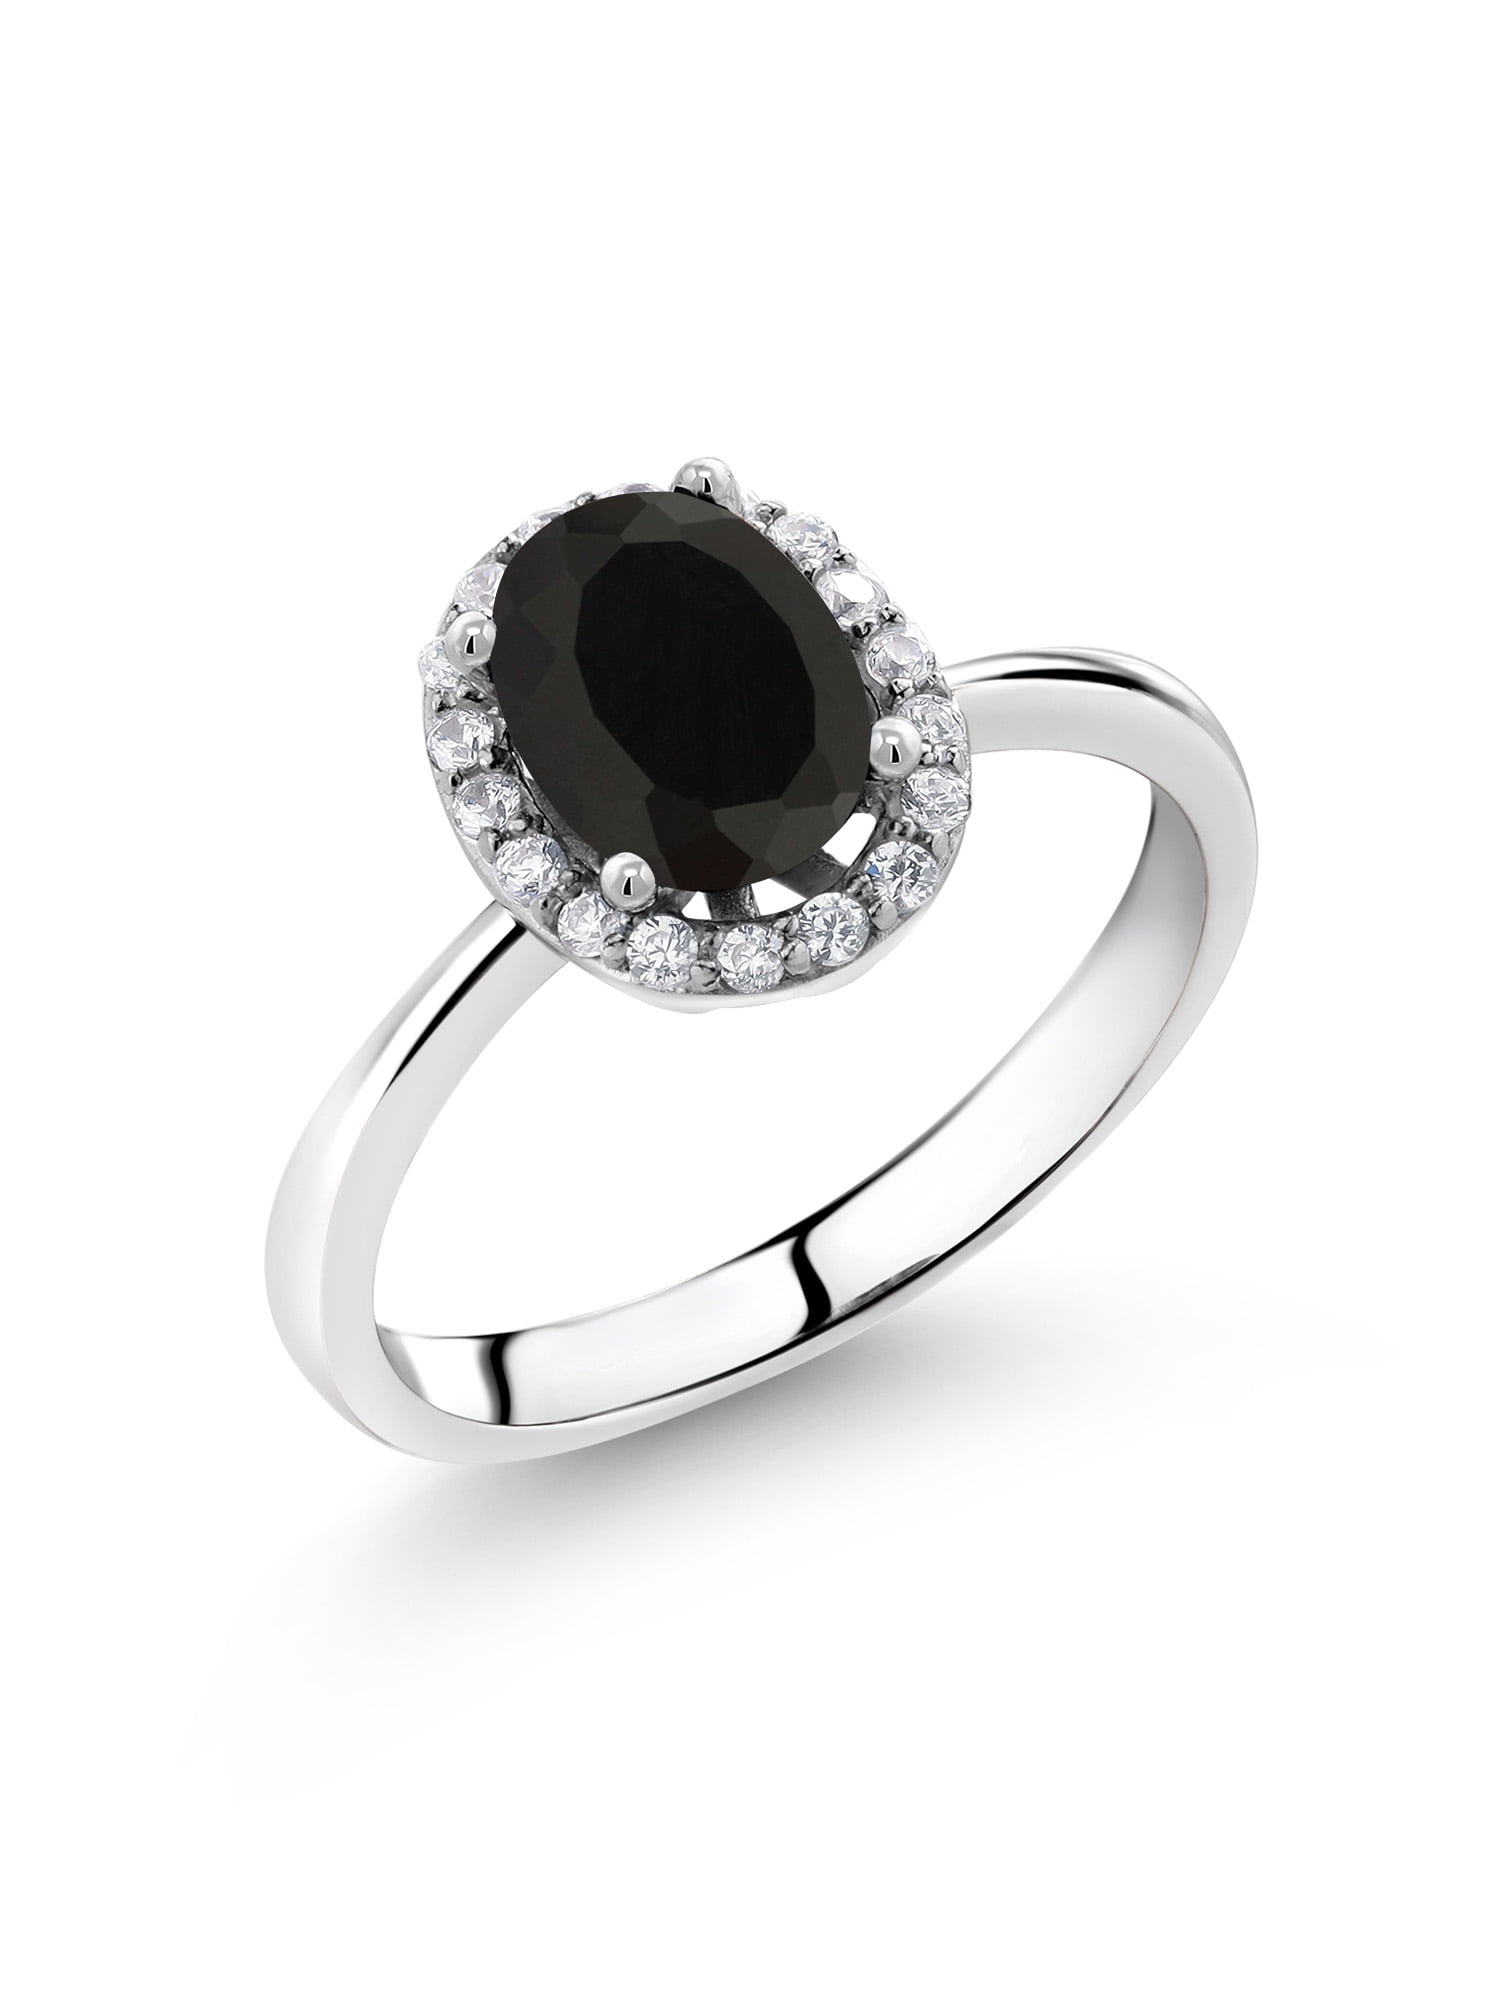 Black Onyx Round Faceted Solitaire 925 Sterling Silver Ring Size 6 7 8 9 